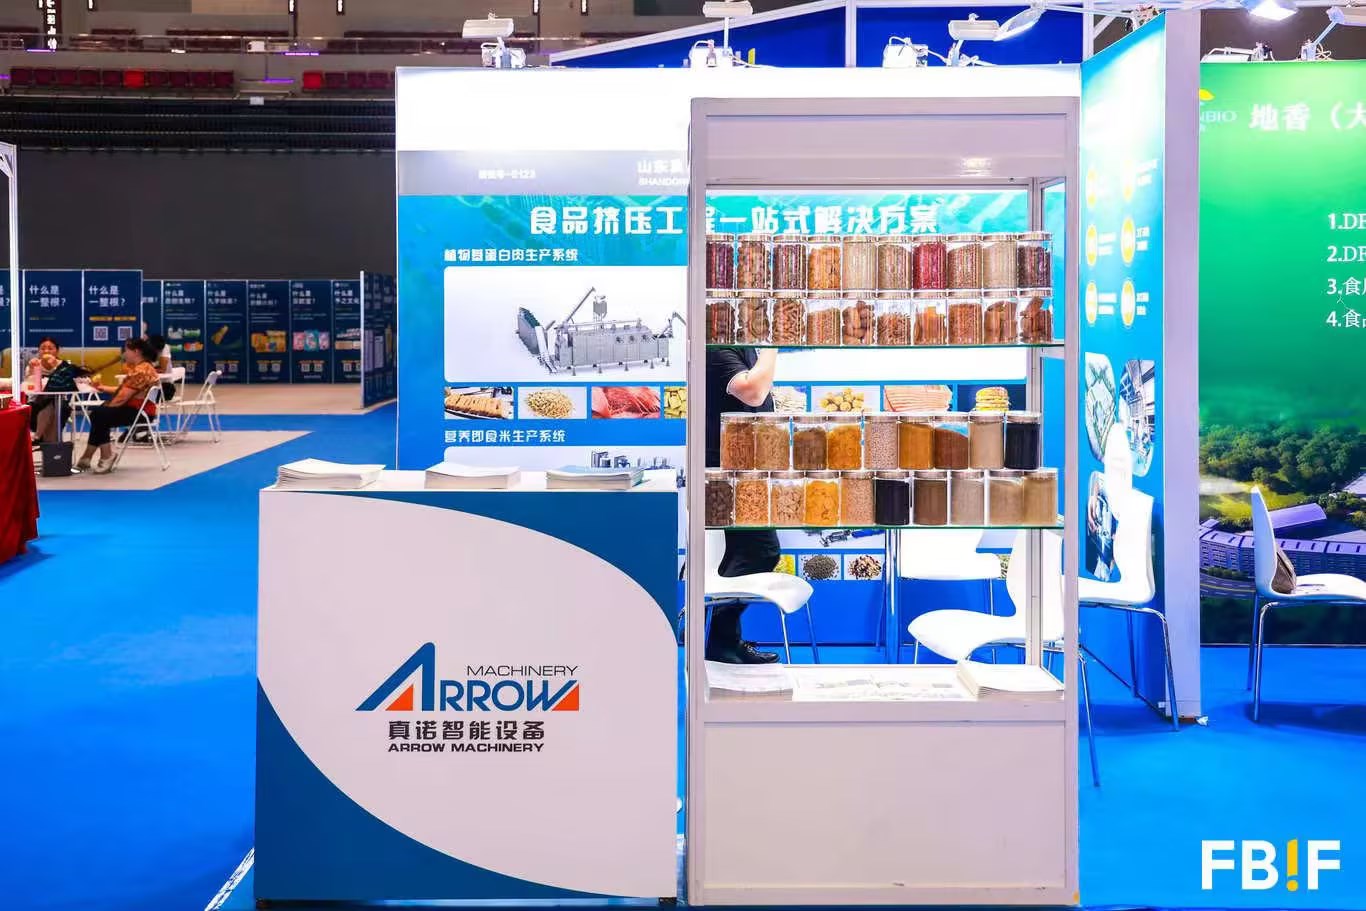 Shandong Arrow was invited to participate in the FBIF exhibition